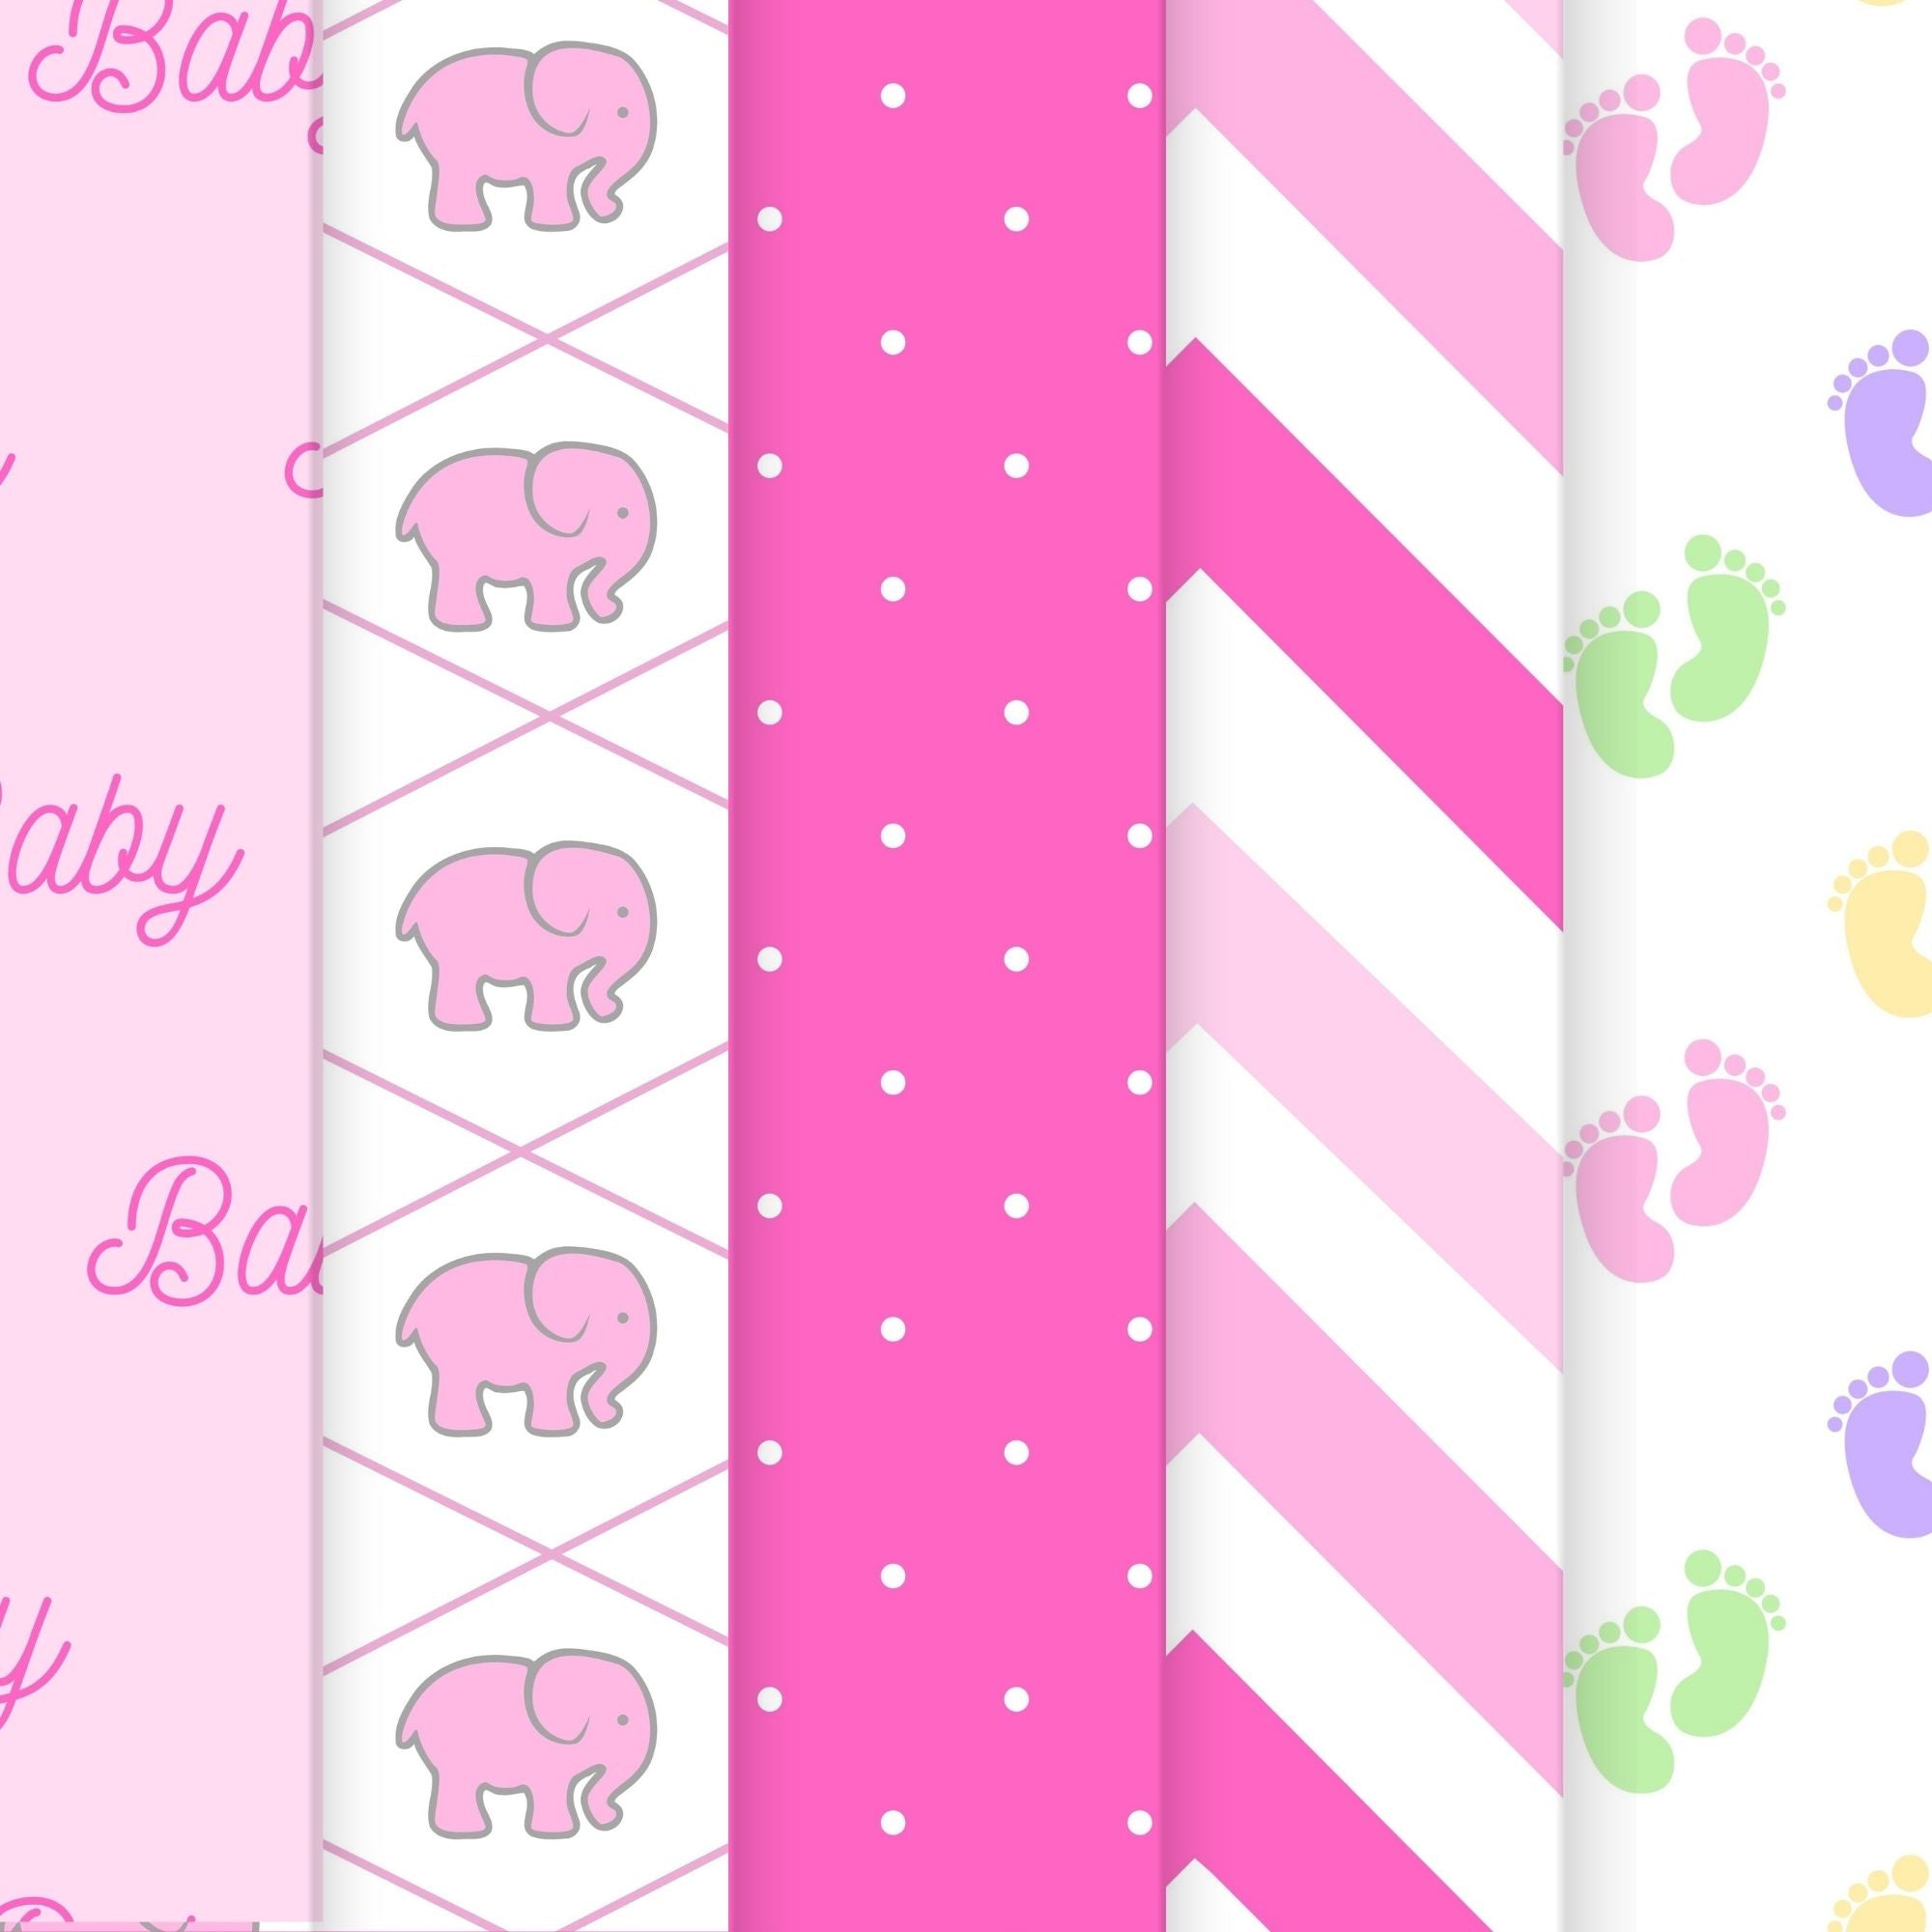 Scrapbookers, this is what you've been looking for! This pink themed baby bundle has 30 unique images that can be printed or used as digital backgrounds.